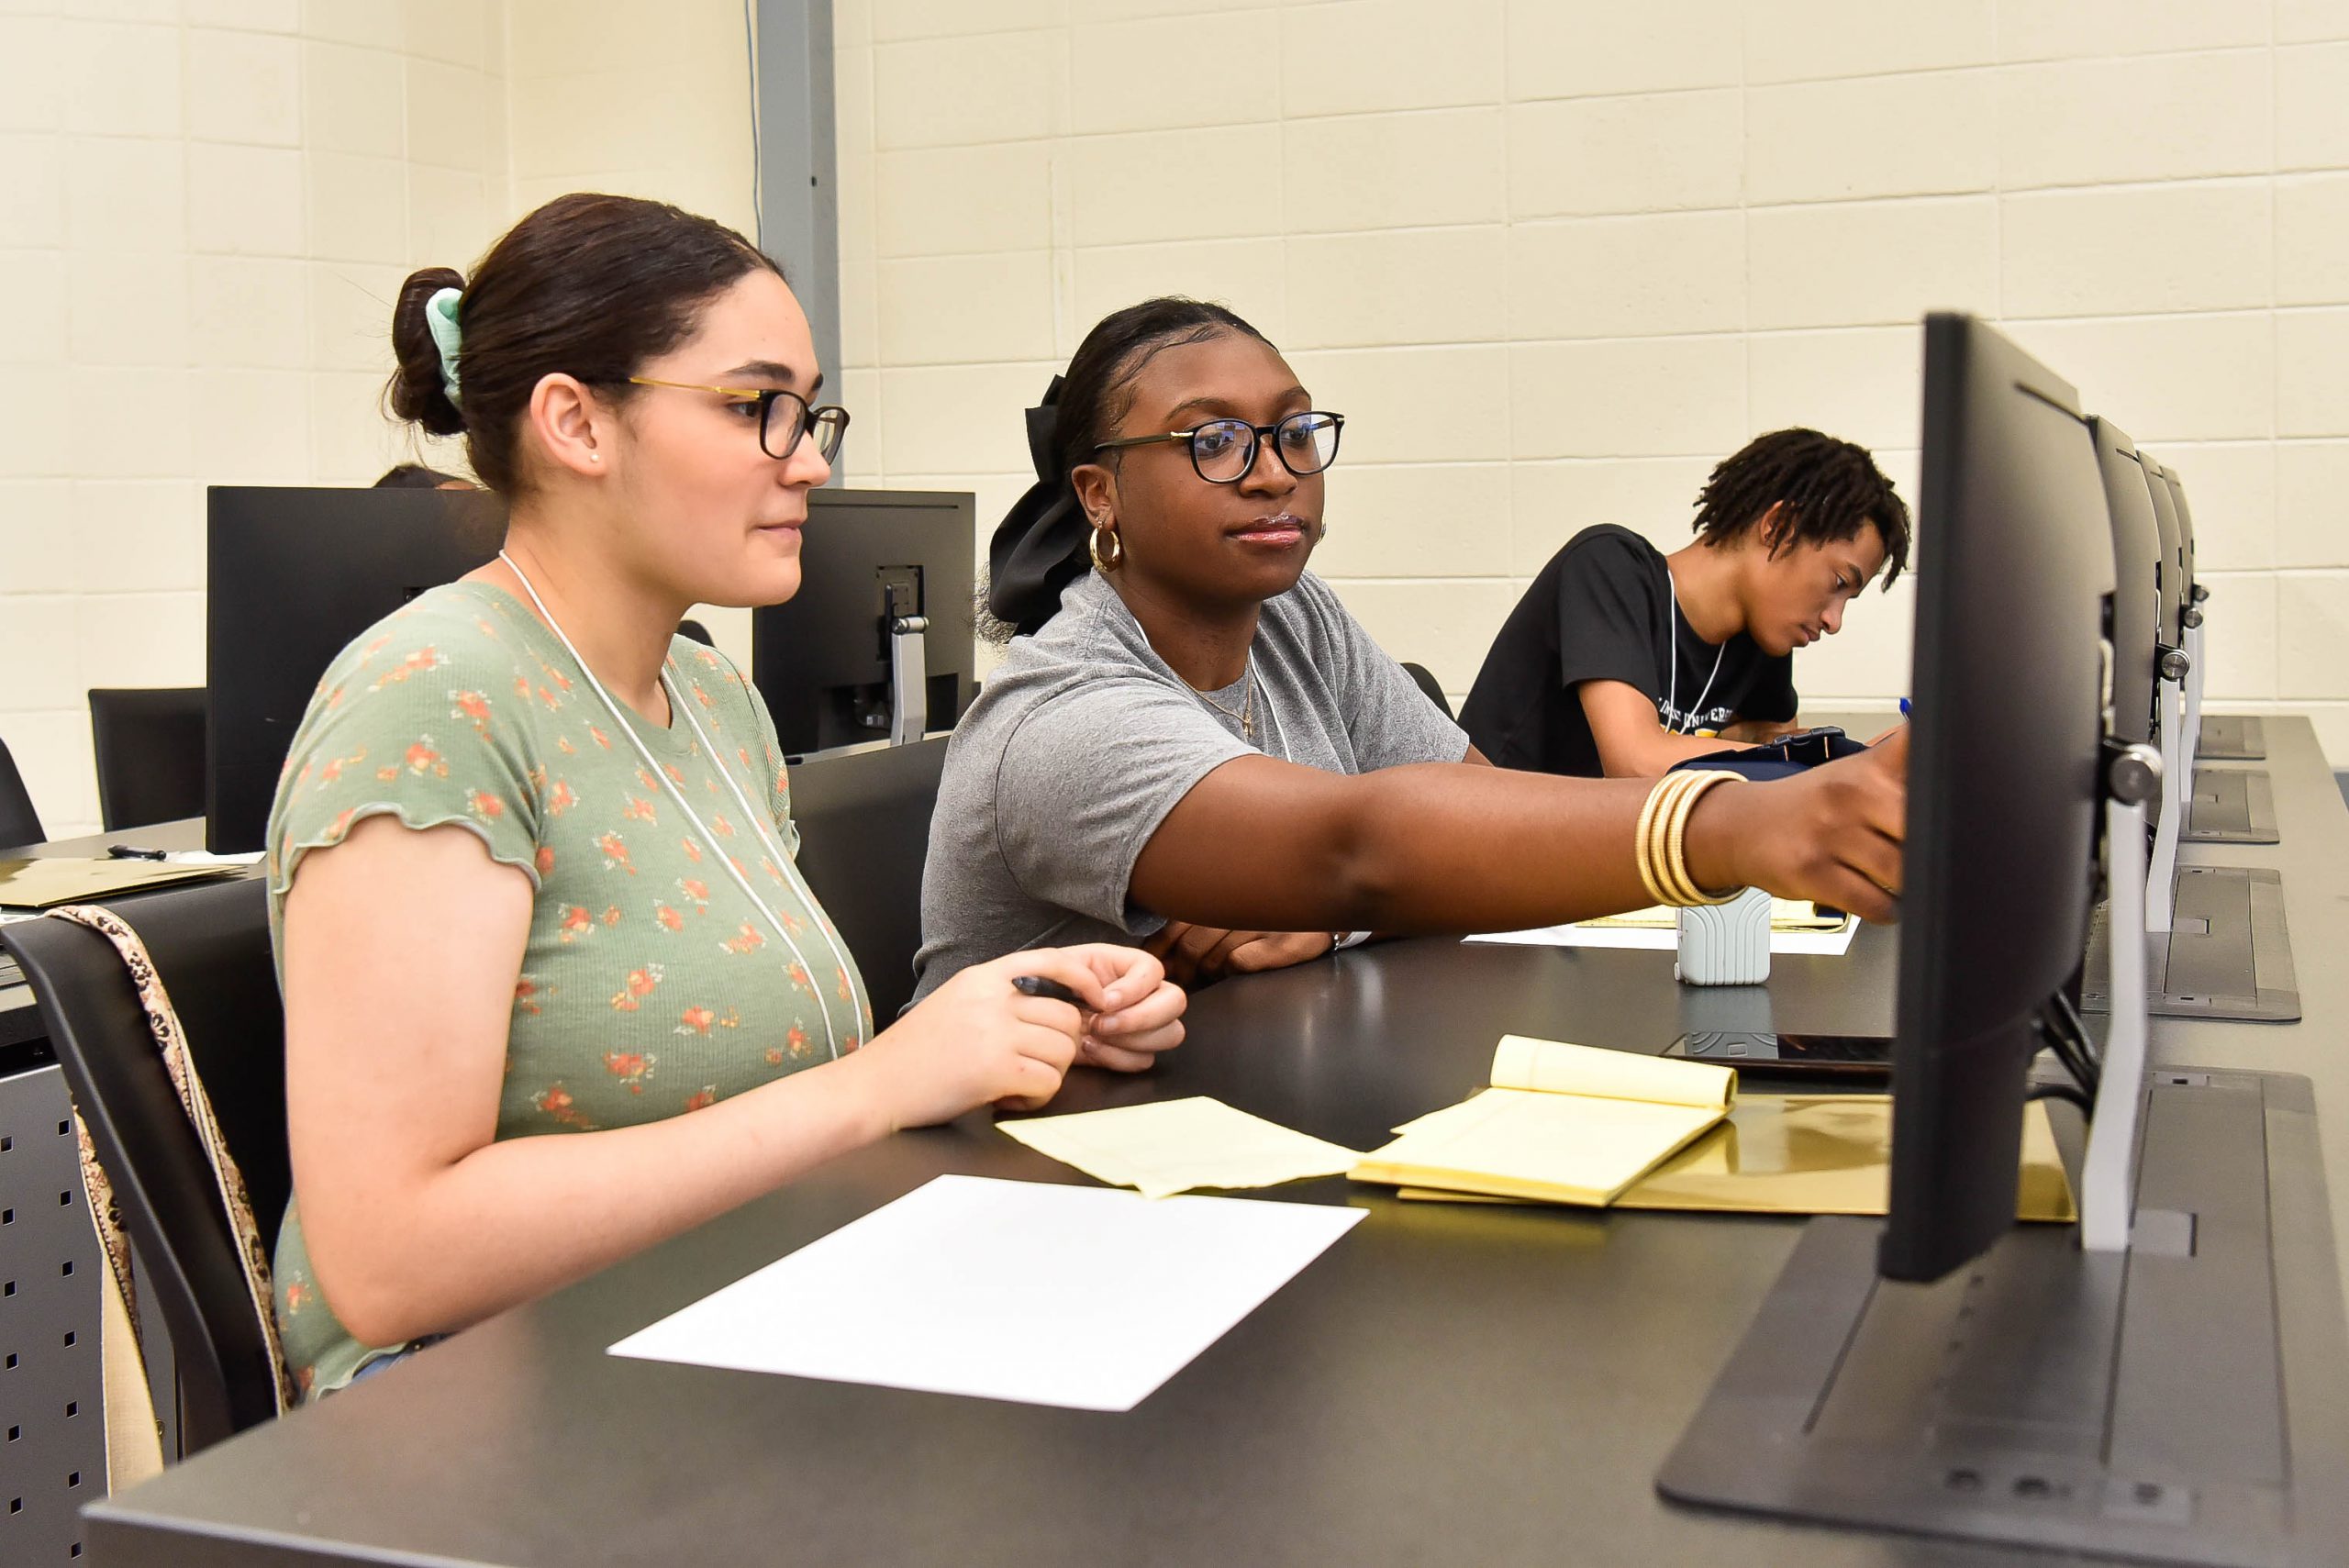 Grambling State News: High school students at computer science camp gain knowledge in cybersecurity and cyberthreat essentials